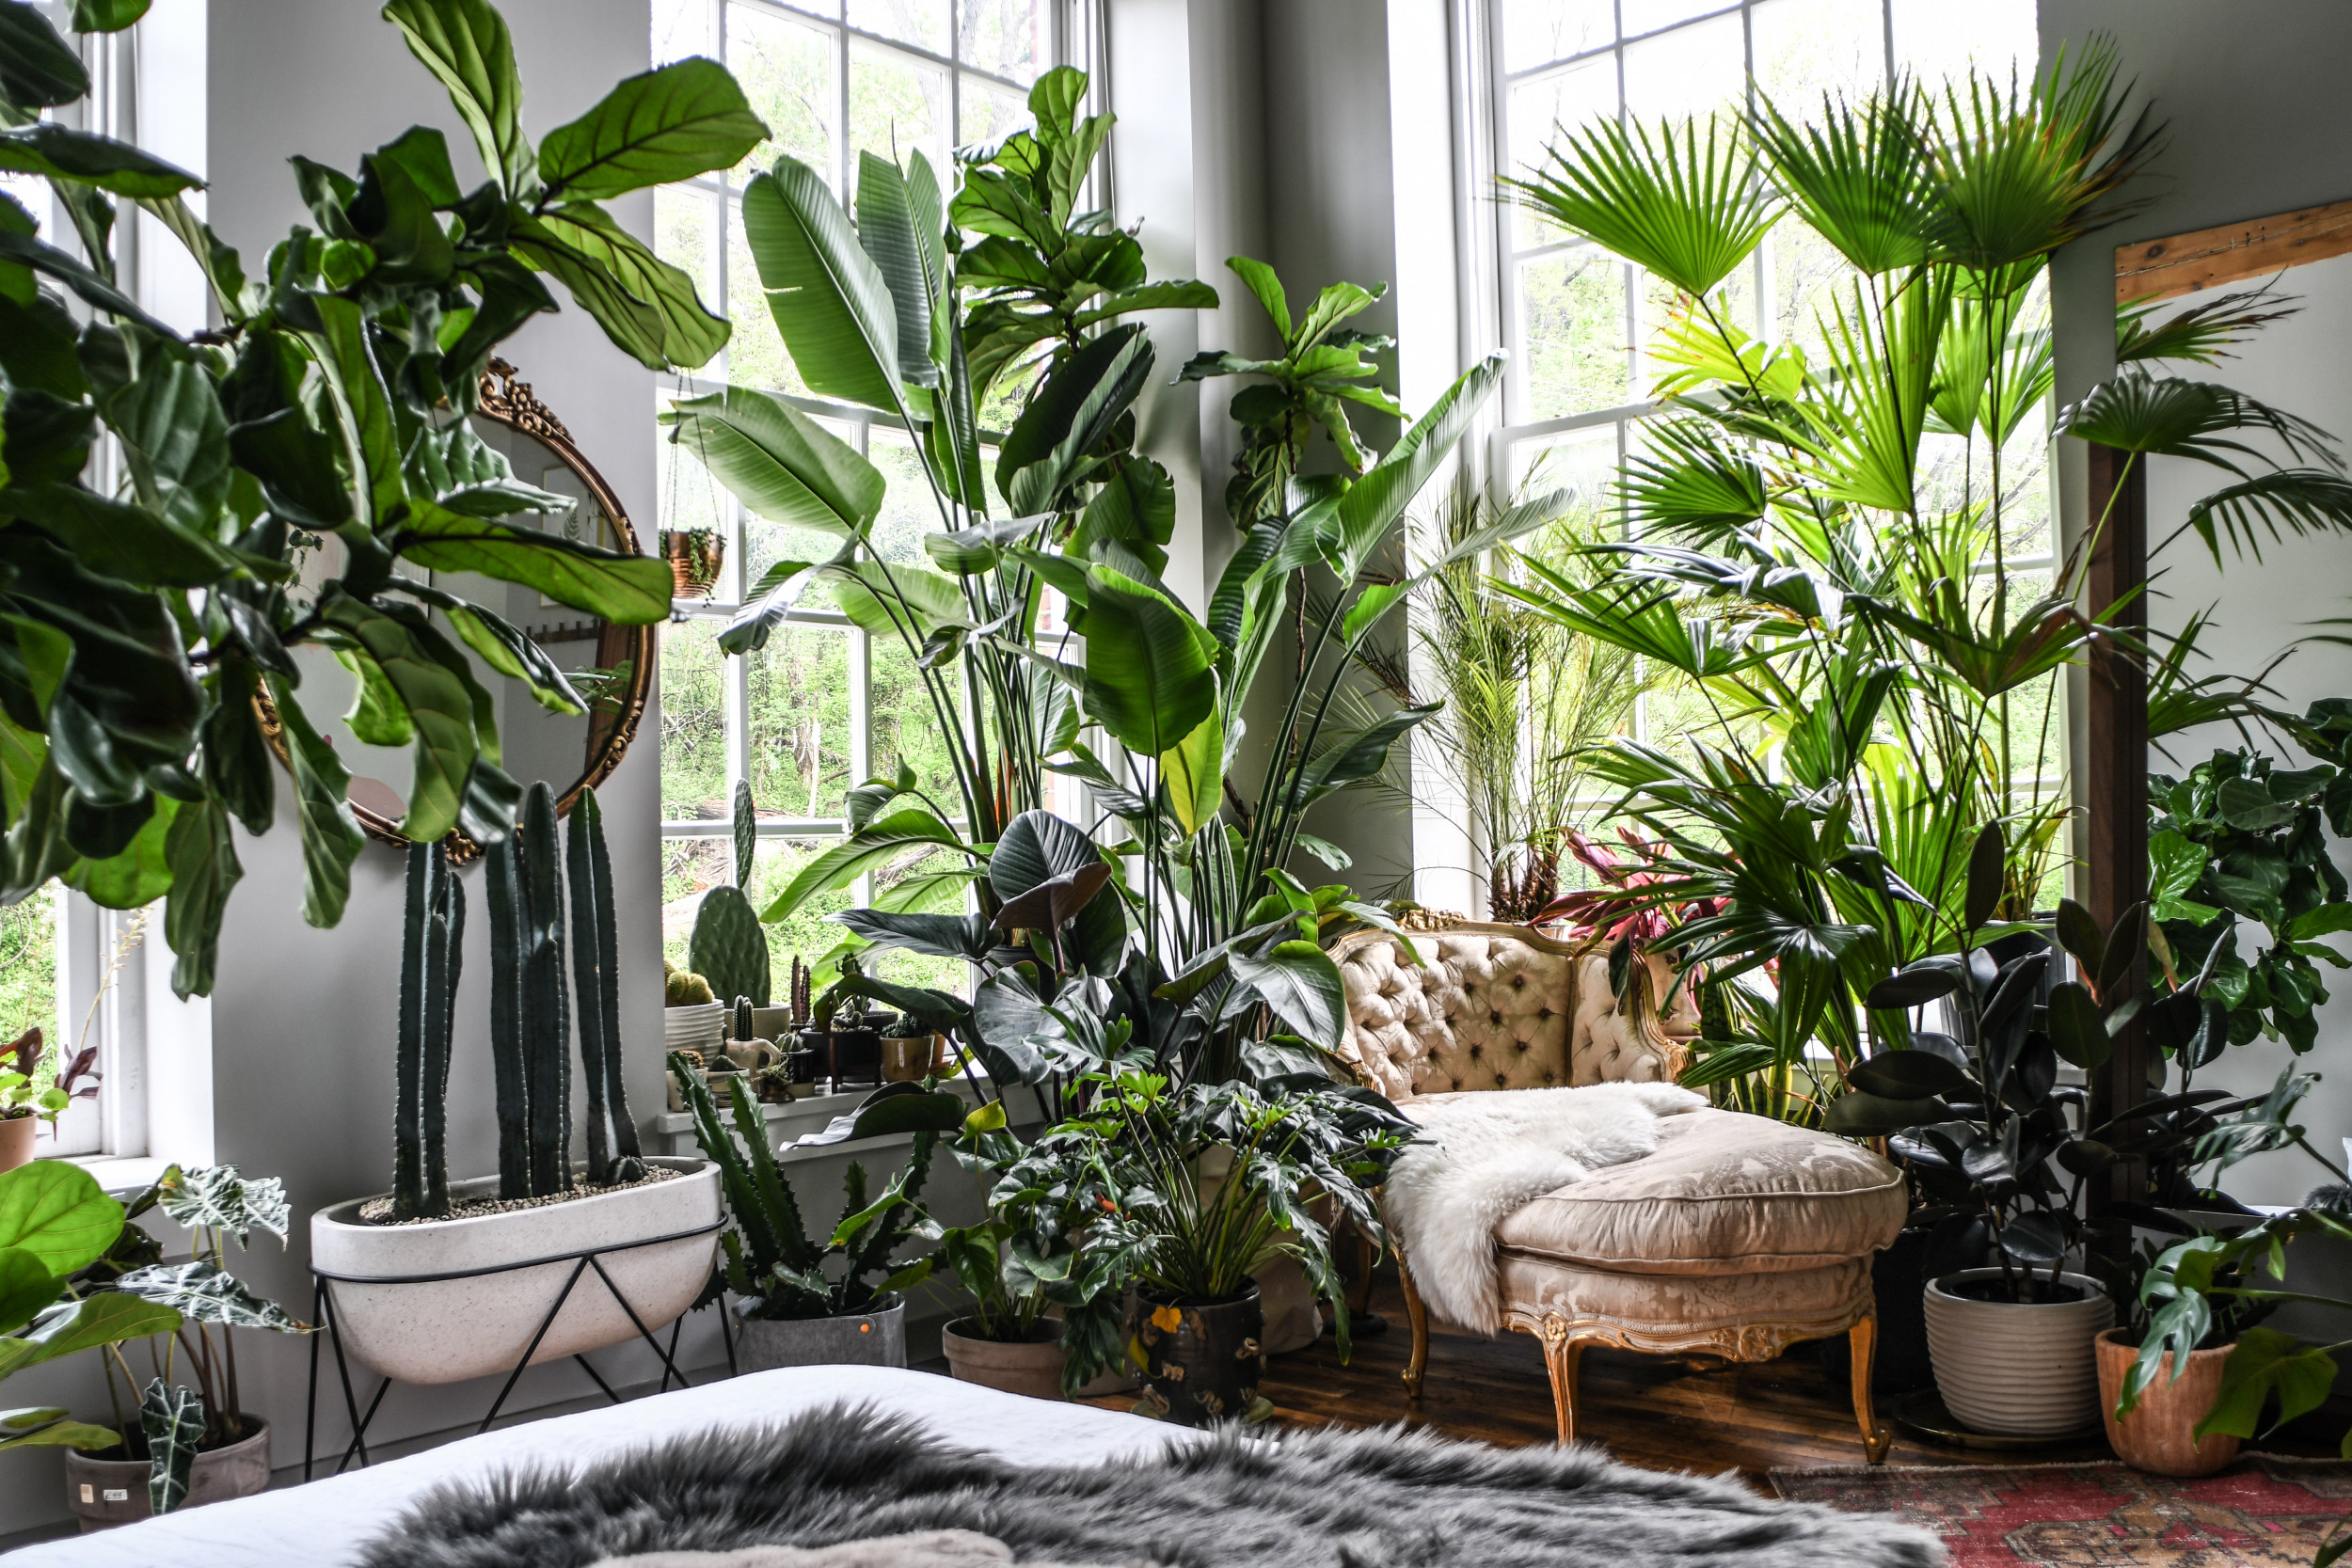 'I'm a Plant Stylist. Here Are 4 Tips to Make a More Peaceful Home'